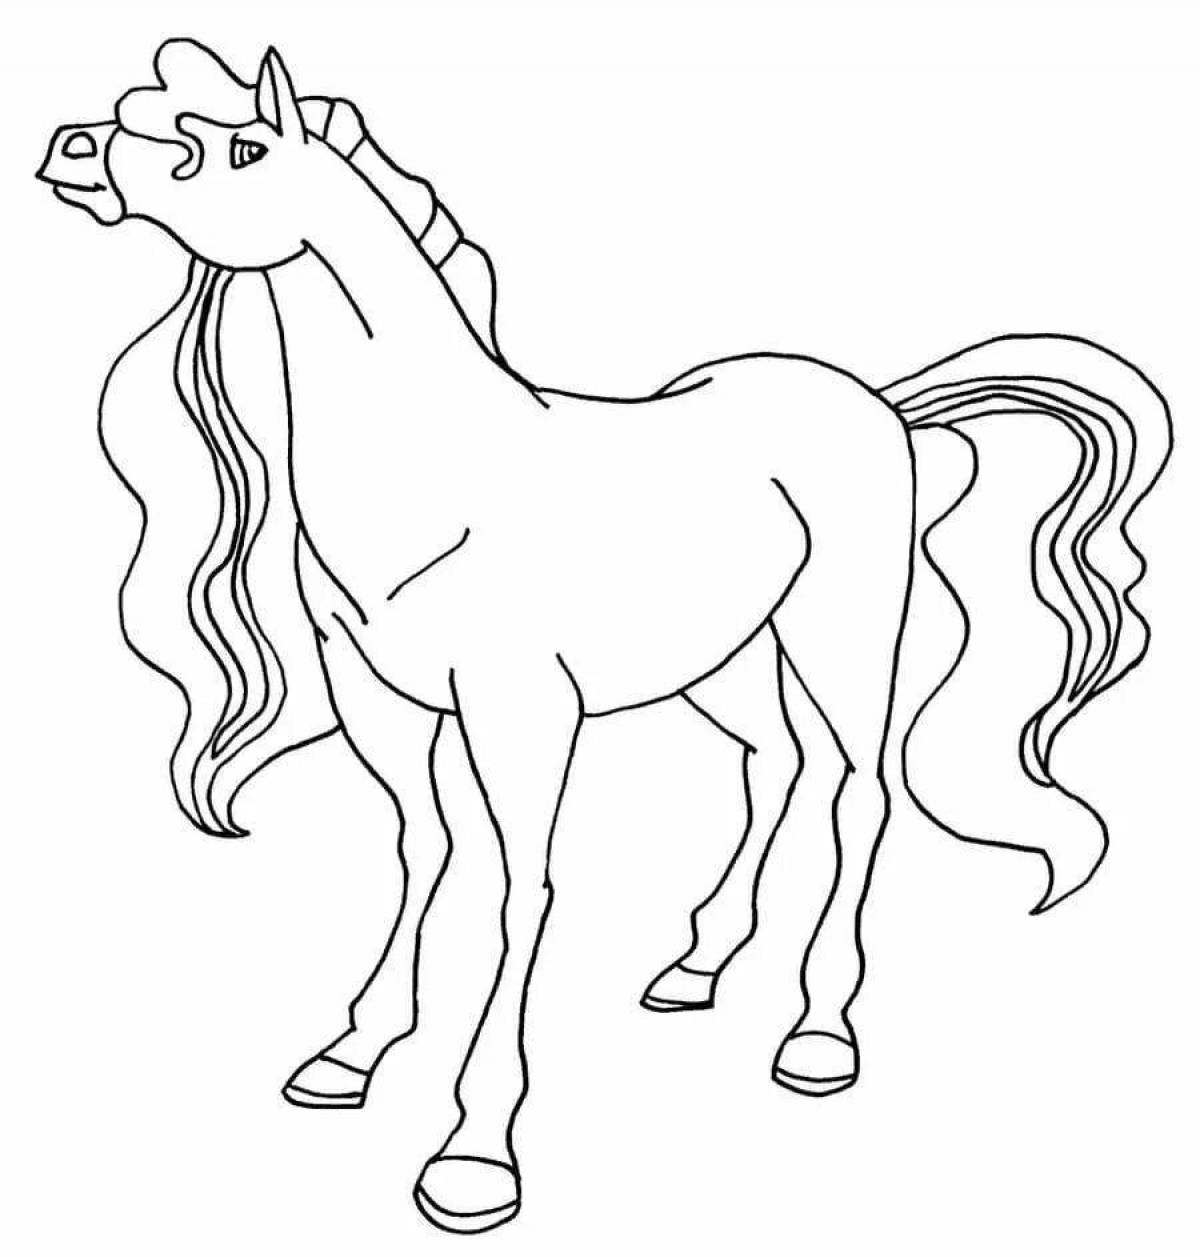 Coloring page great country of horses